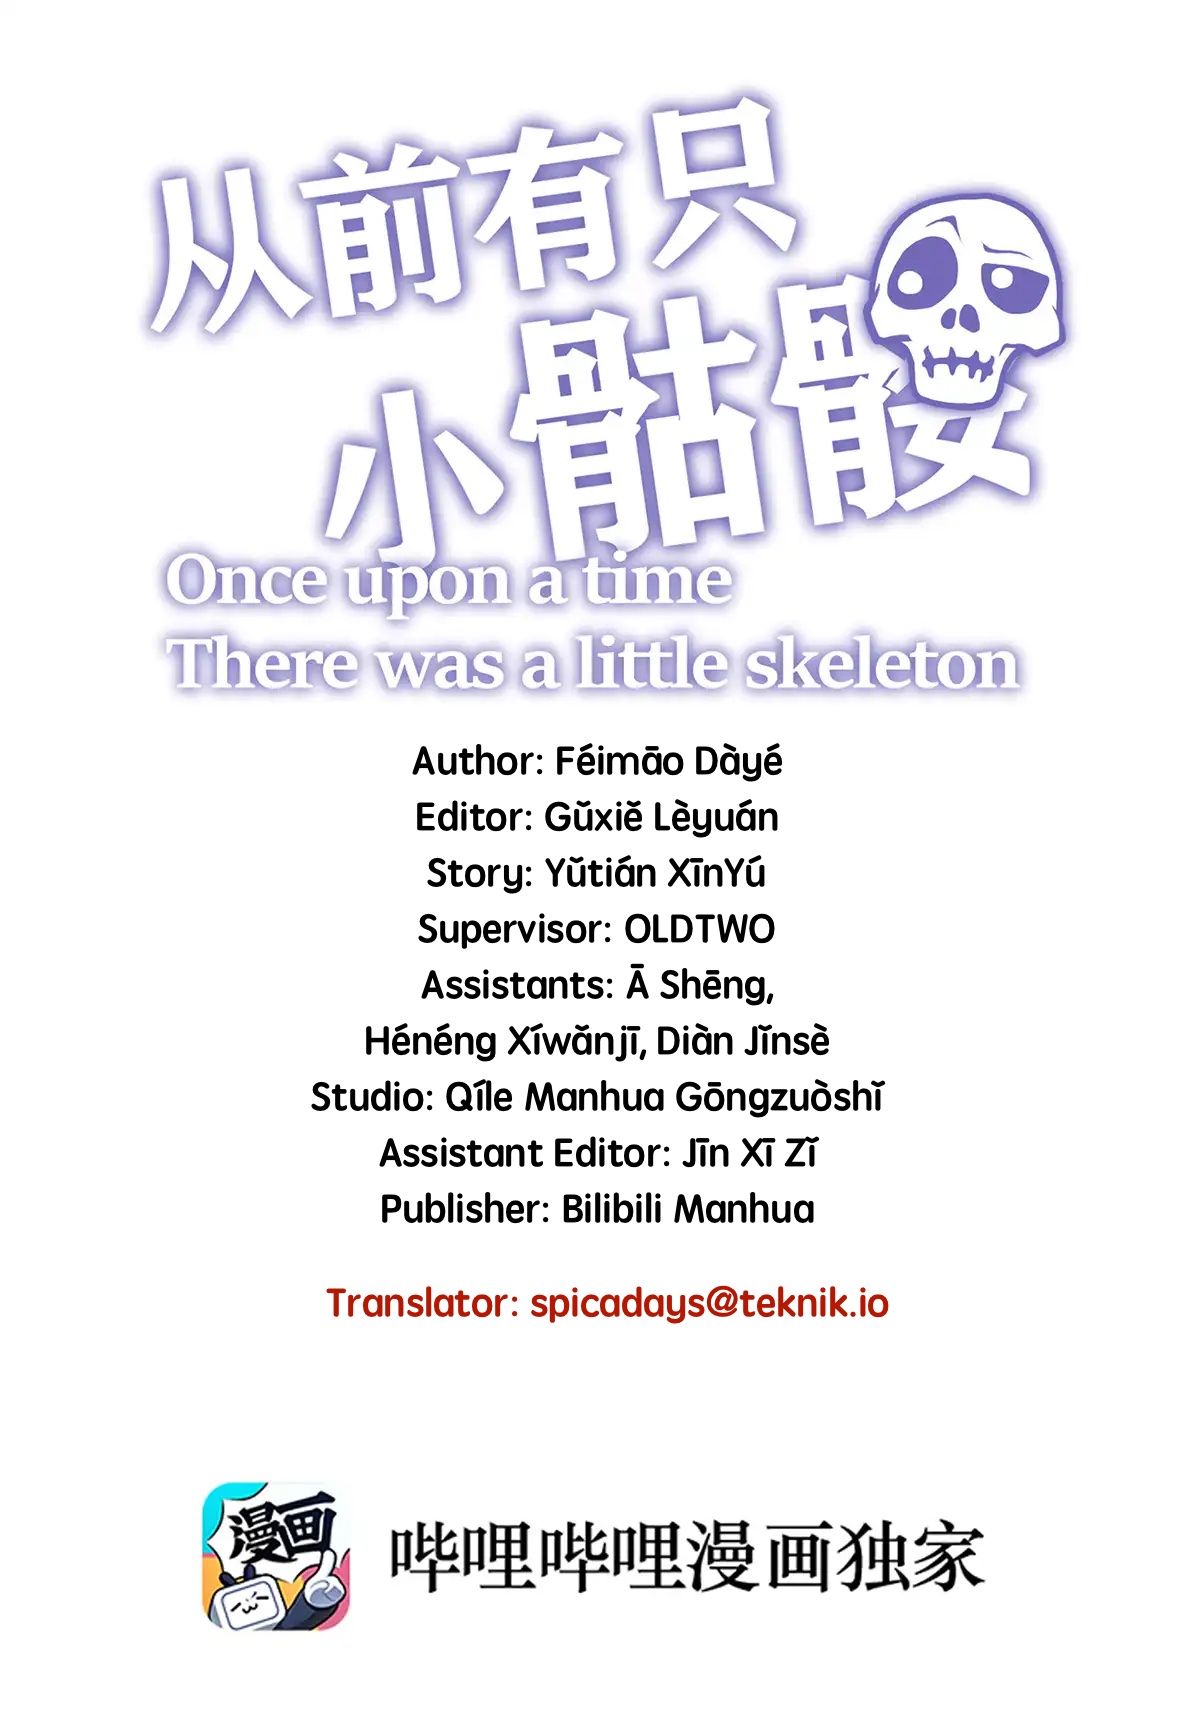 Little Skeleton Ch. 14 Tricked in the very end.